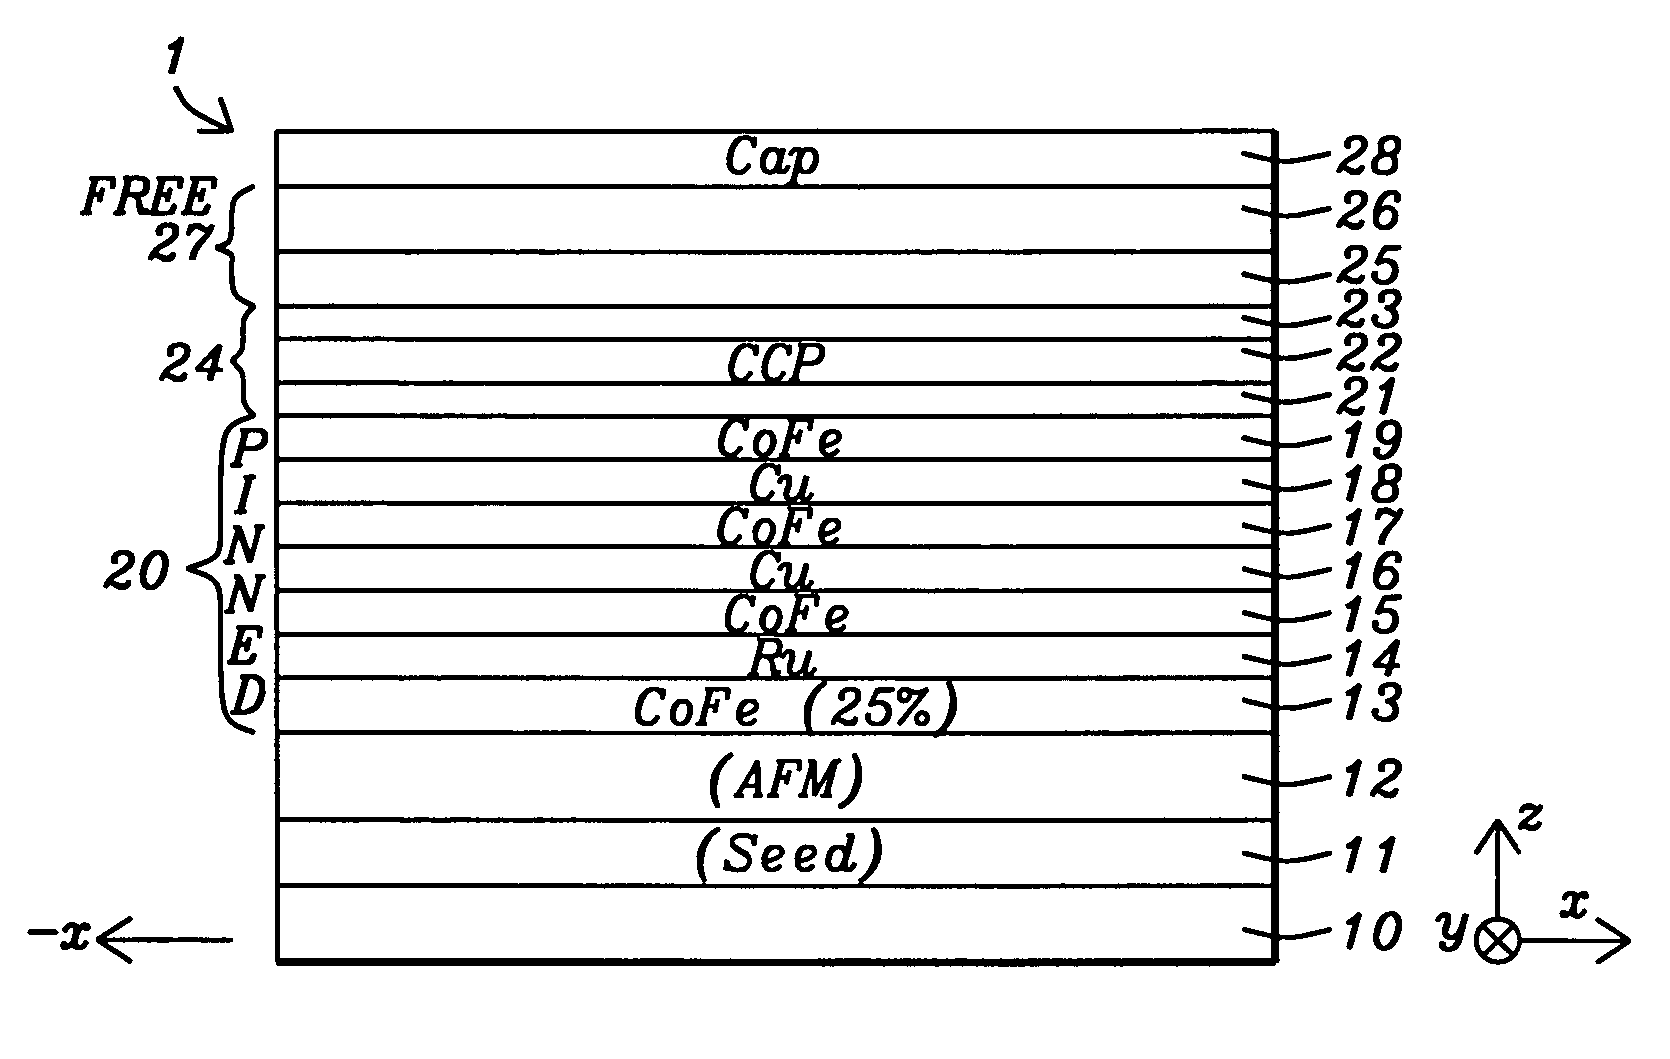 CPP structure with enhanced GMR ratio